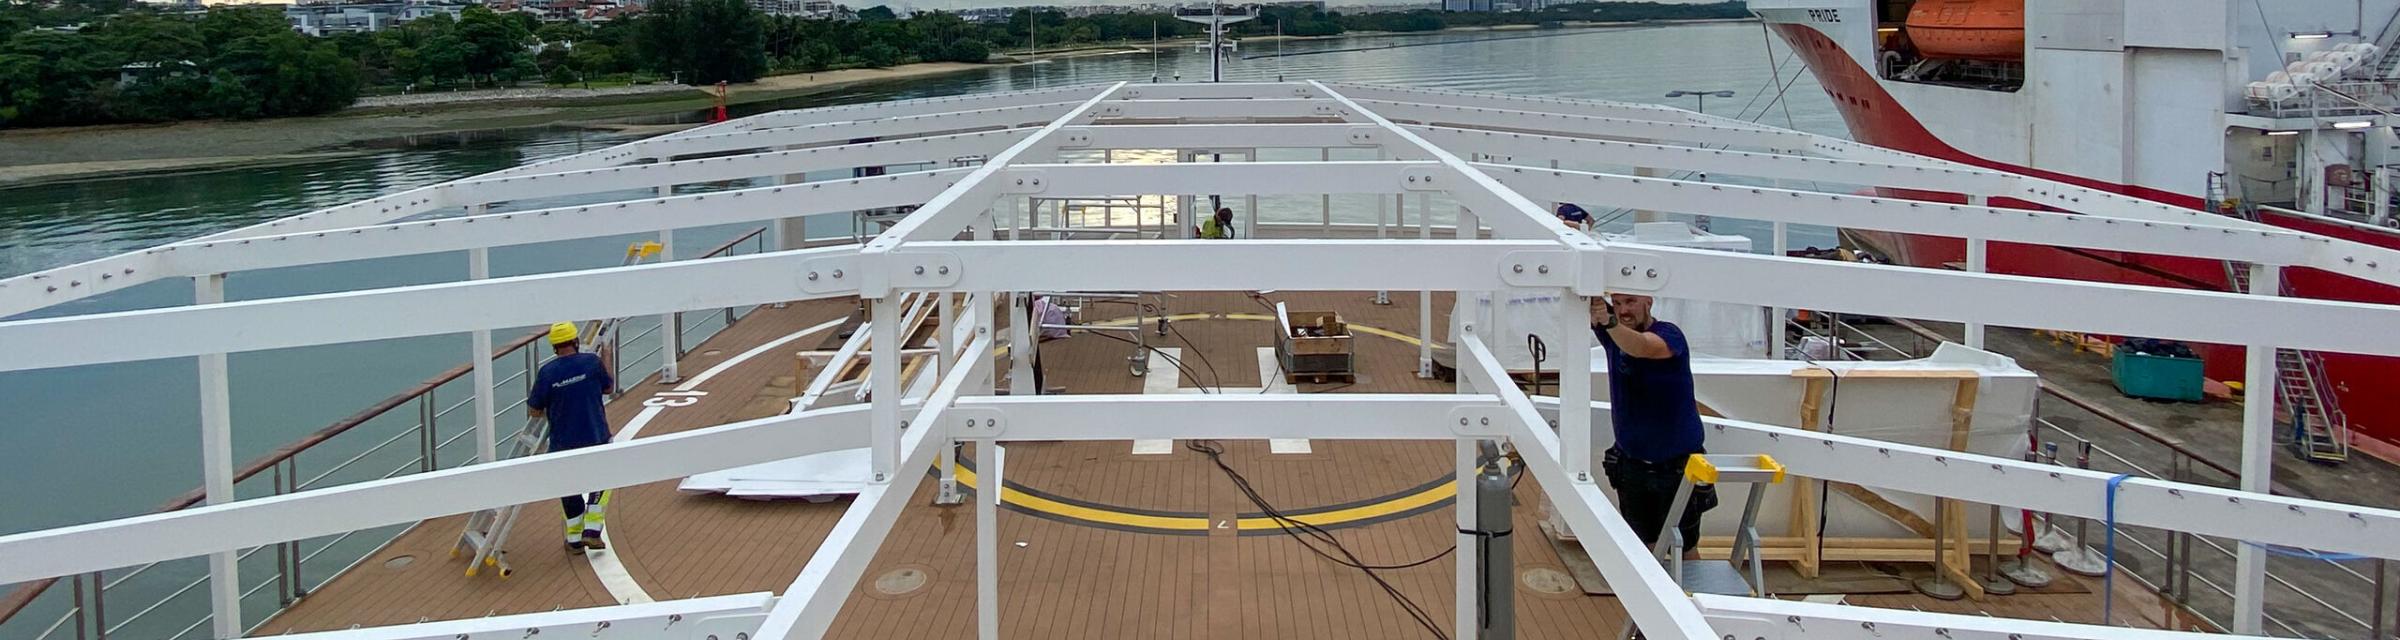 Singapore :: Doulos Hope's bookfair canopy is constructed on the top deck